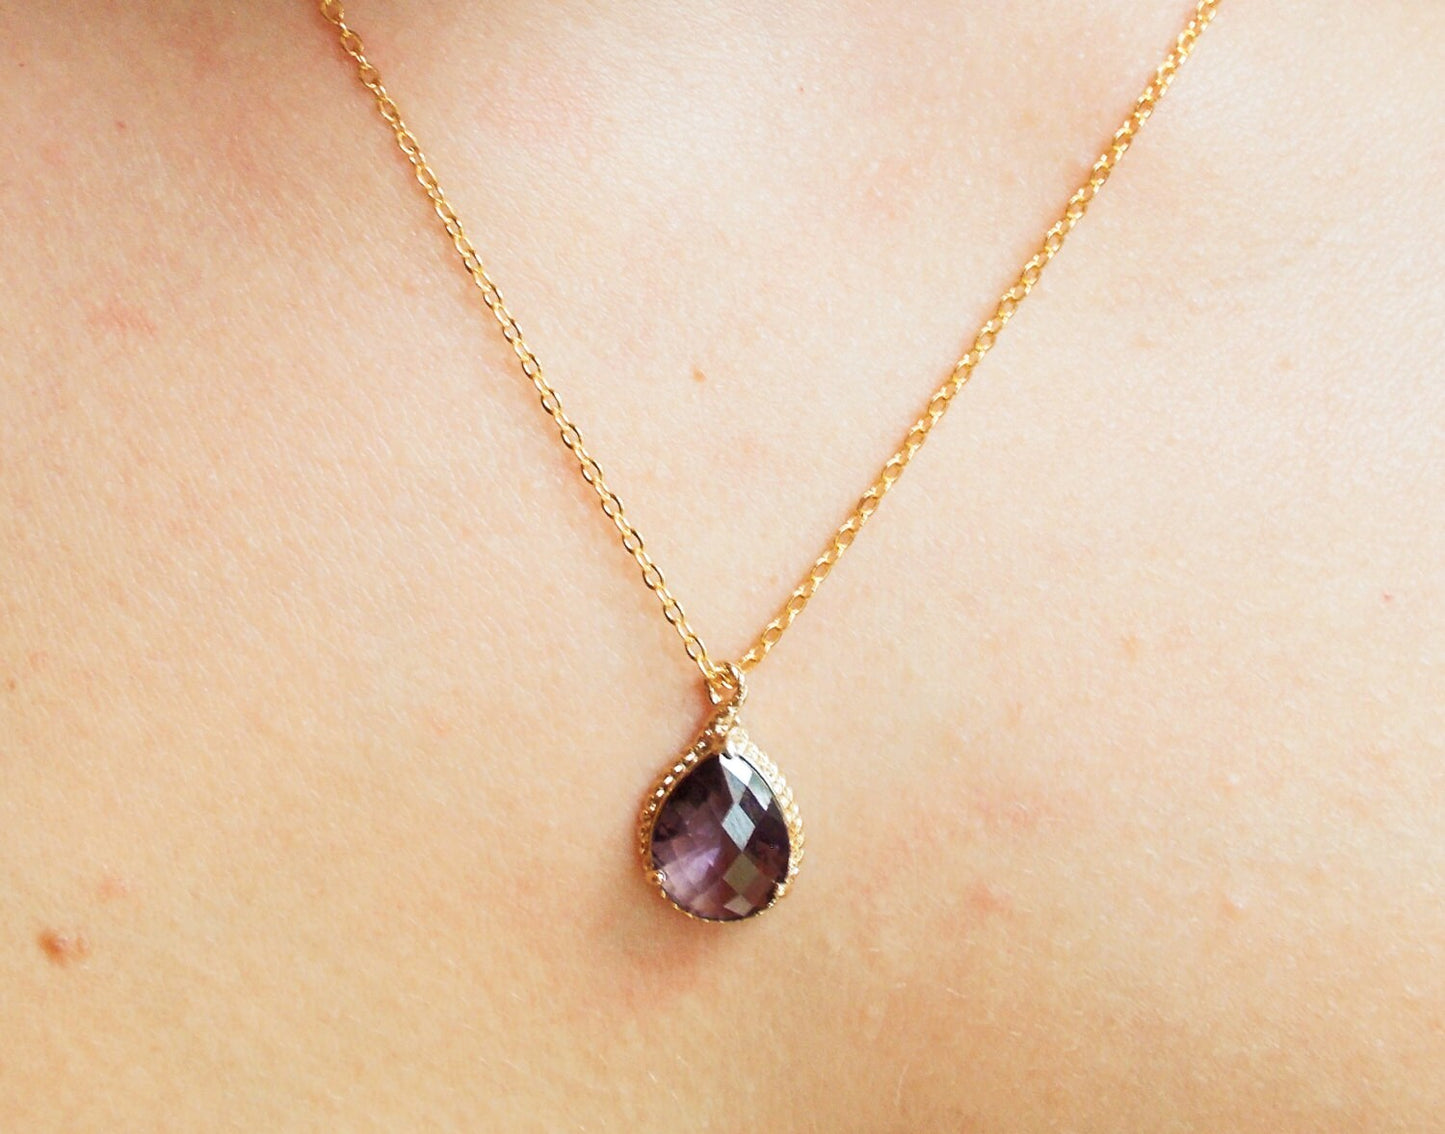 Amethyst Teardrop 16K Gold Plated Stacking Necklace - BridesMaid Gift - Gemstone Necklace - Amethyst Stone Necklace